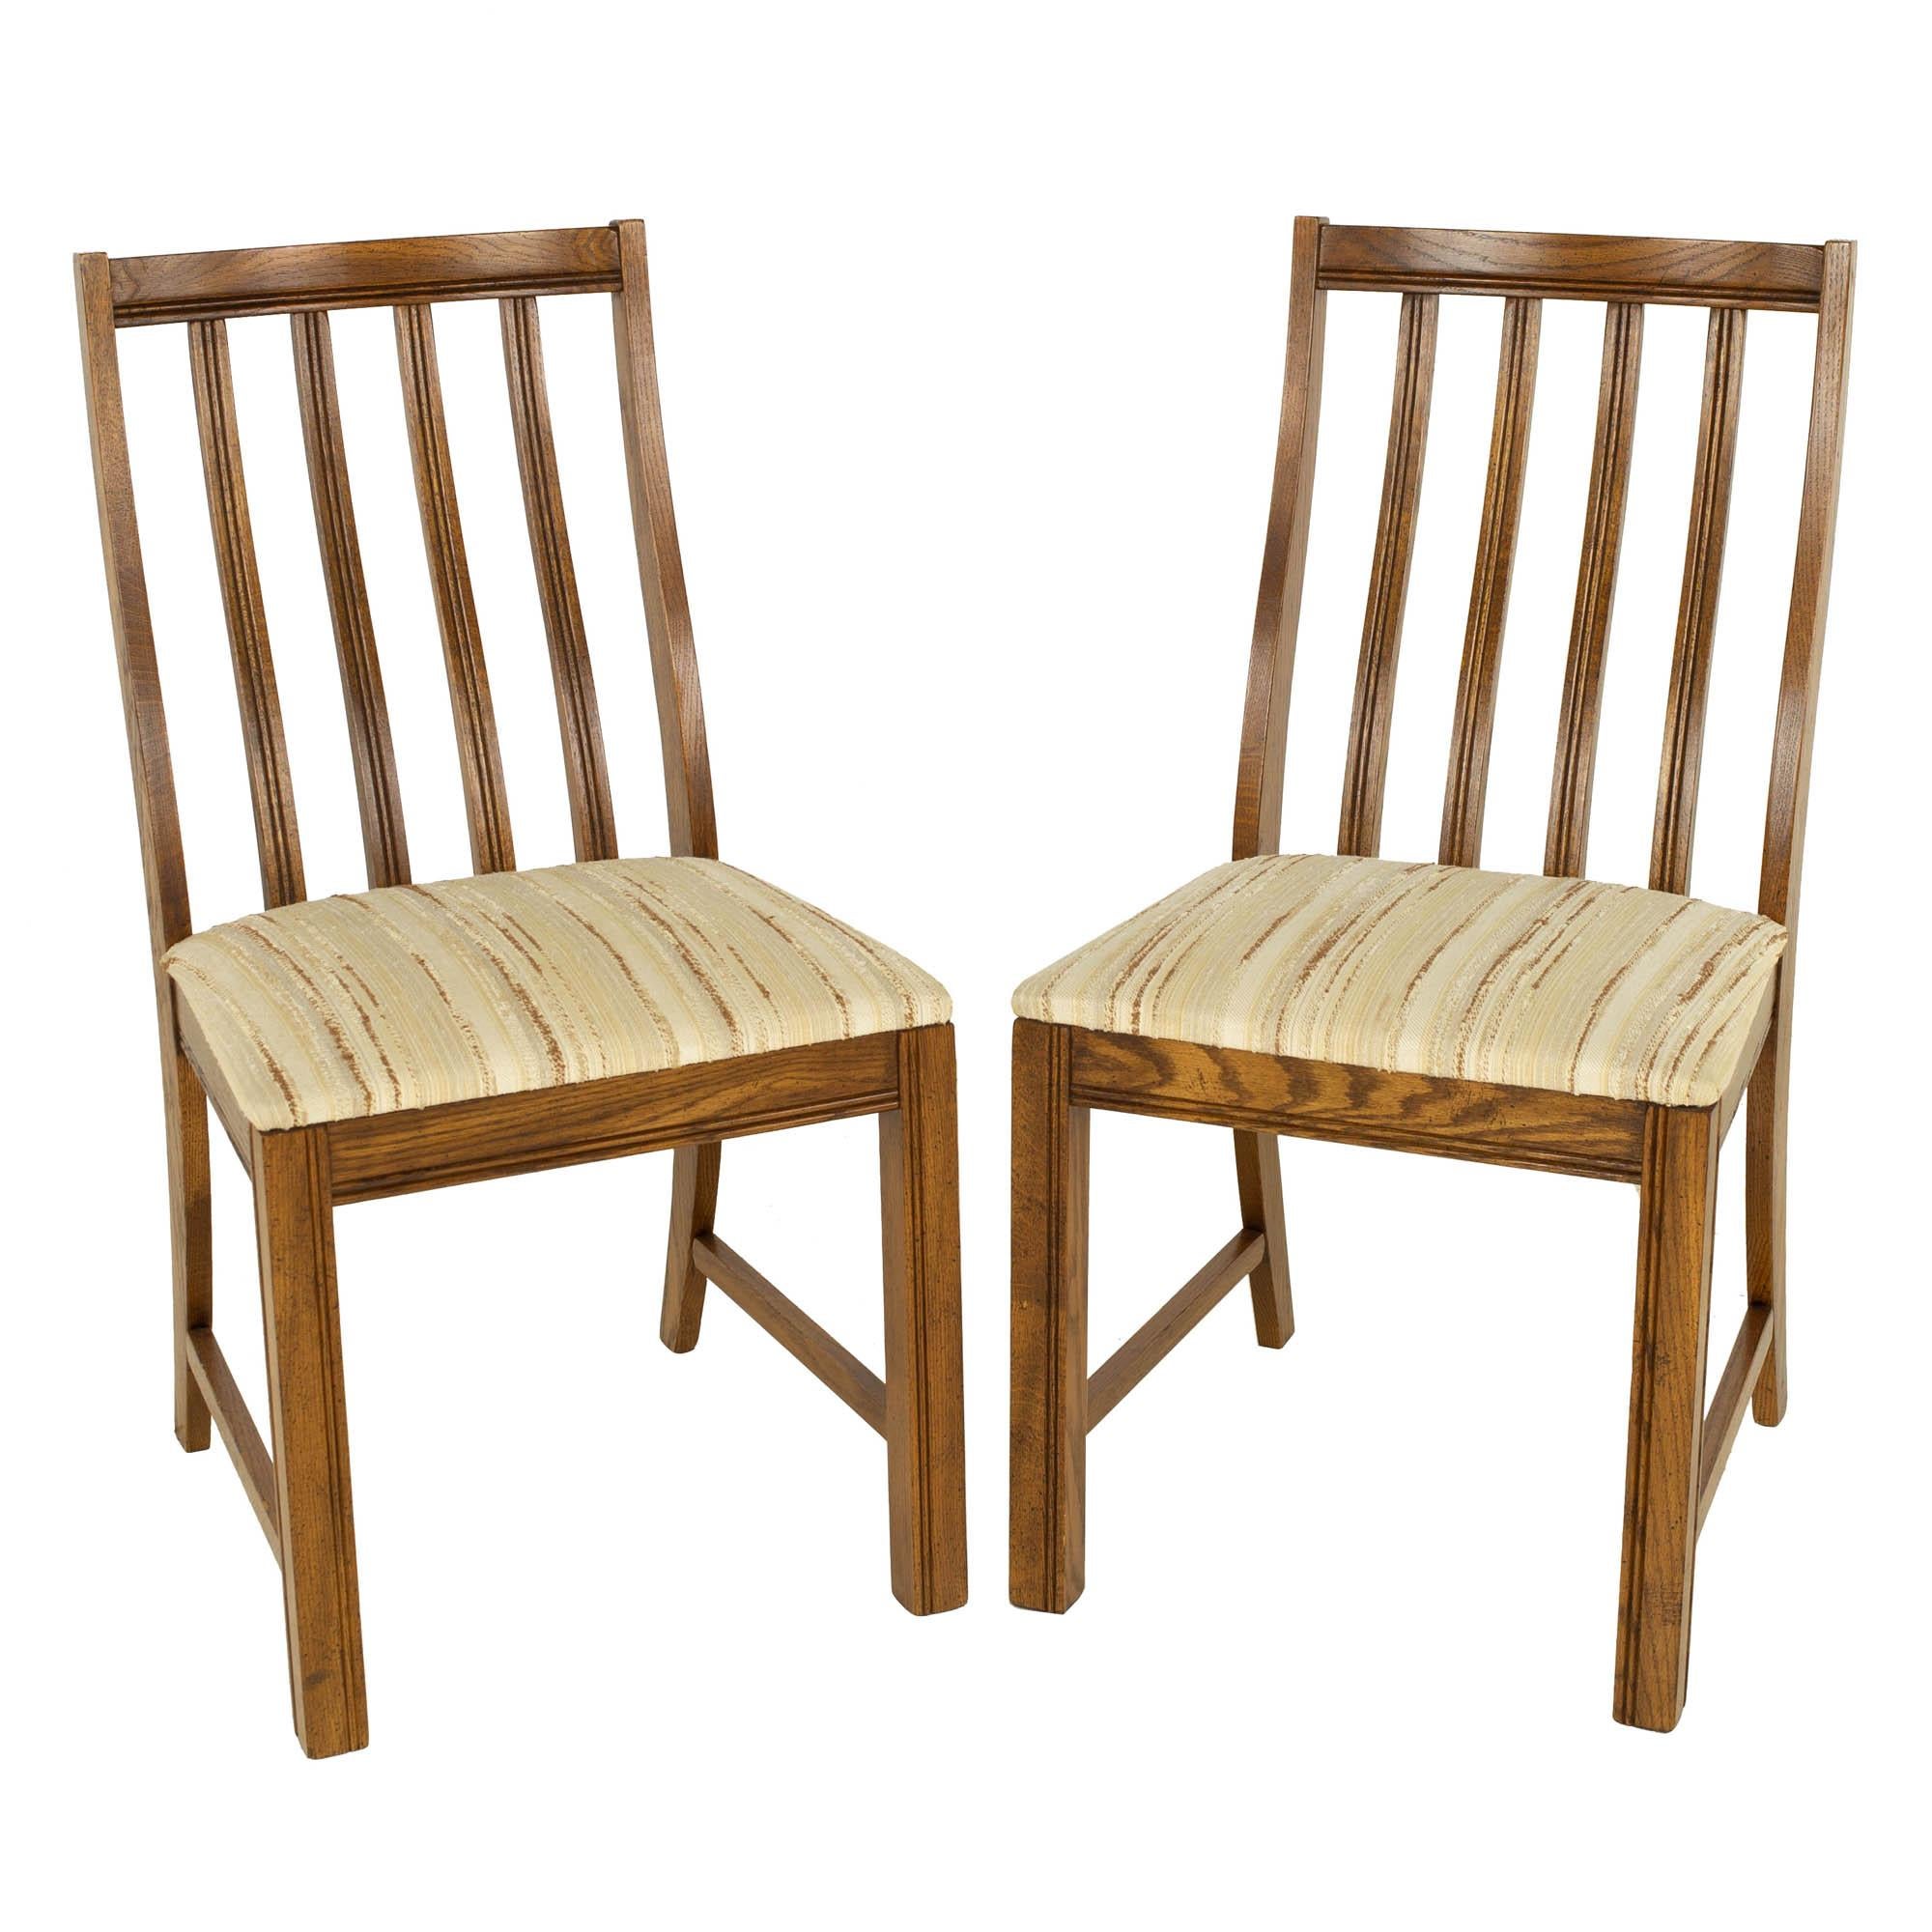 Lane First Edition Style Keller Mid Century Walnut Dining Chairs, Set of 6 In Good Condition For Sale In Countryside, IL